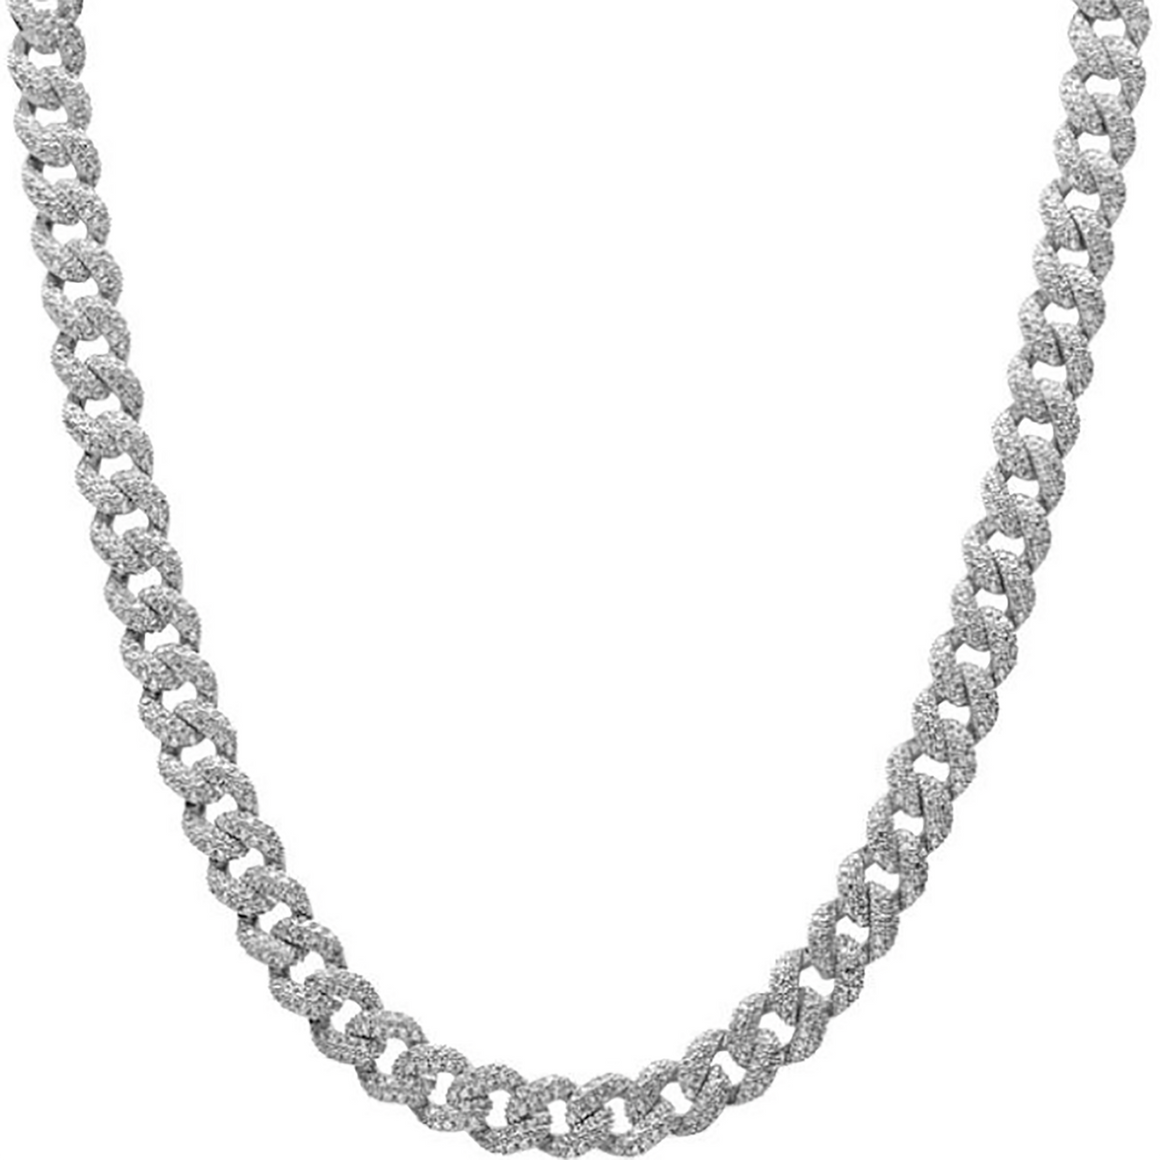 54 FLORAL 14mm ICED TENNIS CRYSTAL DIAMOND CURB NECKLACE CHAIN - SILVER